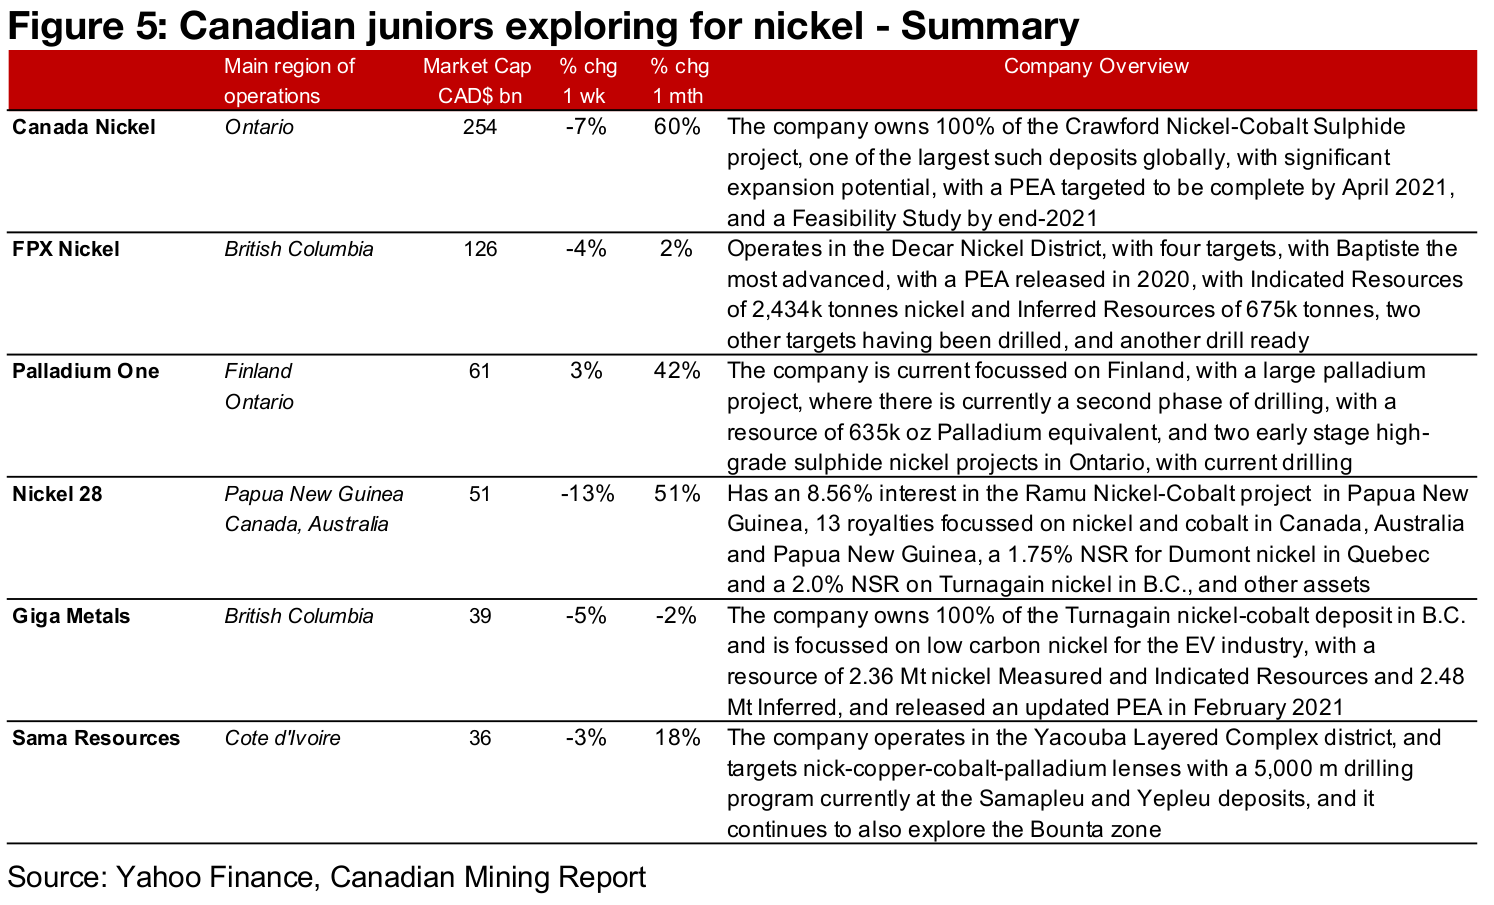 A look at the larger Canadian juniors in base metals